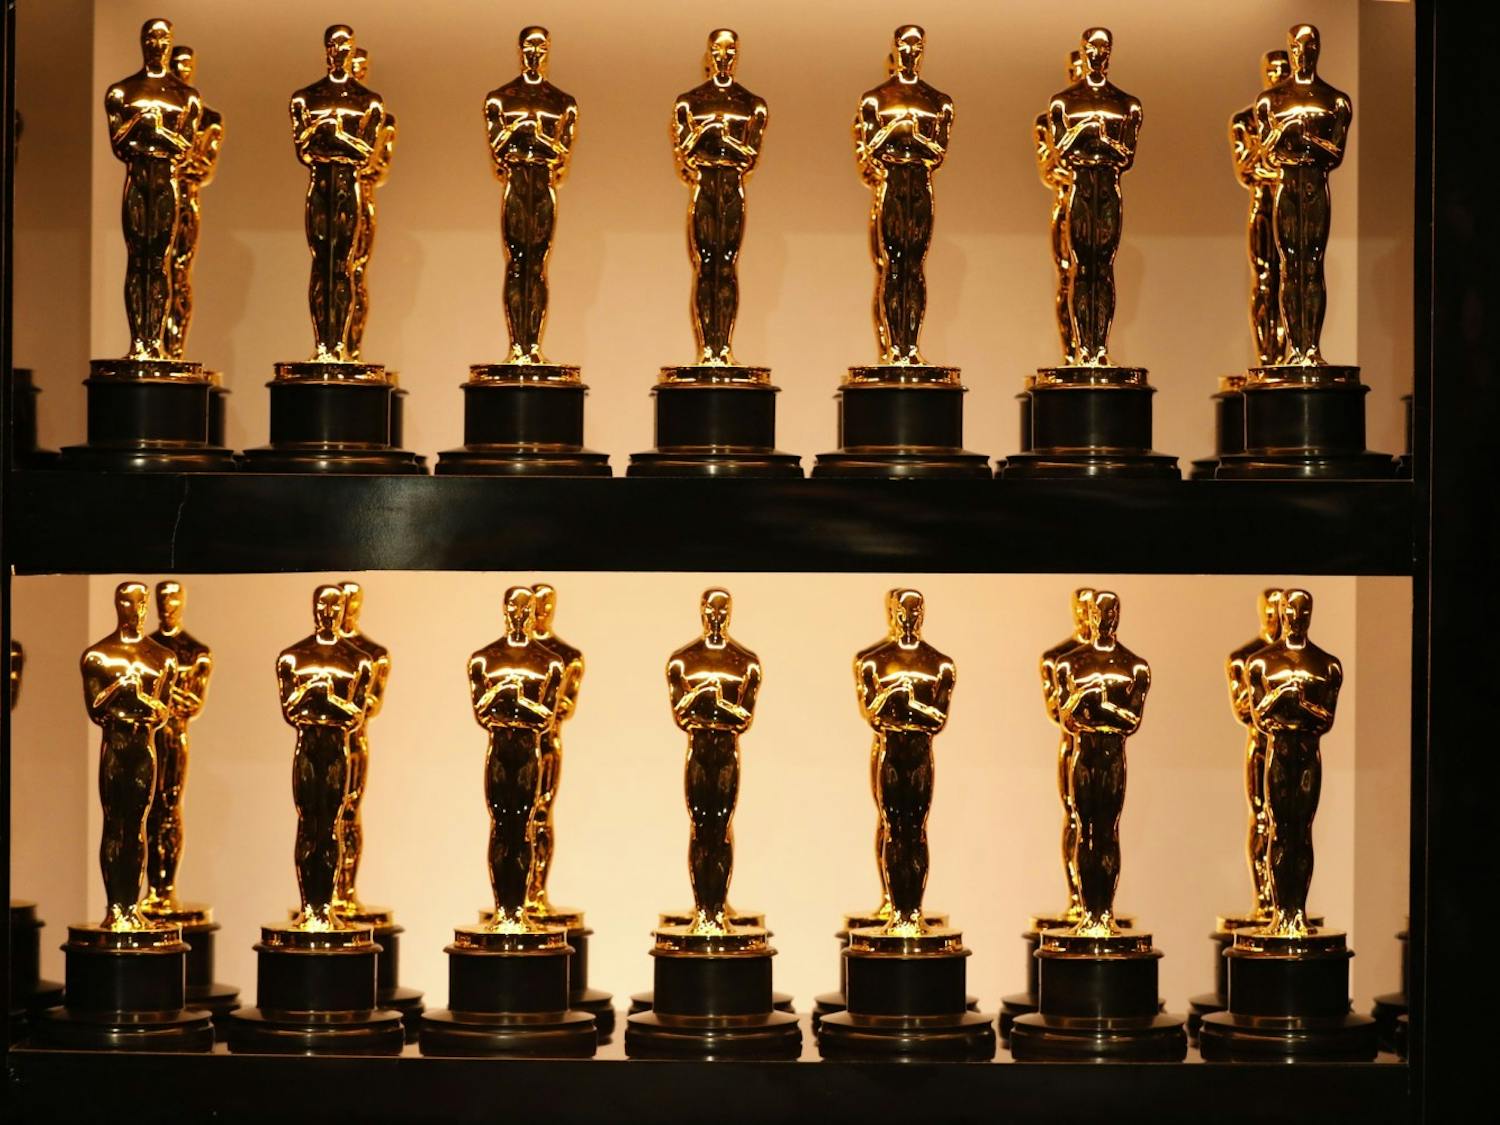 Oscar statues backstage at the 90th Academy Awards on Sunday, March 4, 2018, at the Dolby Theatre at Hollywood & Highland Center in Hollywood, California. (Al Seib/Los Angeles Times/TNS)